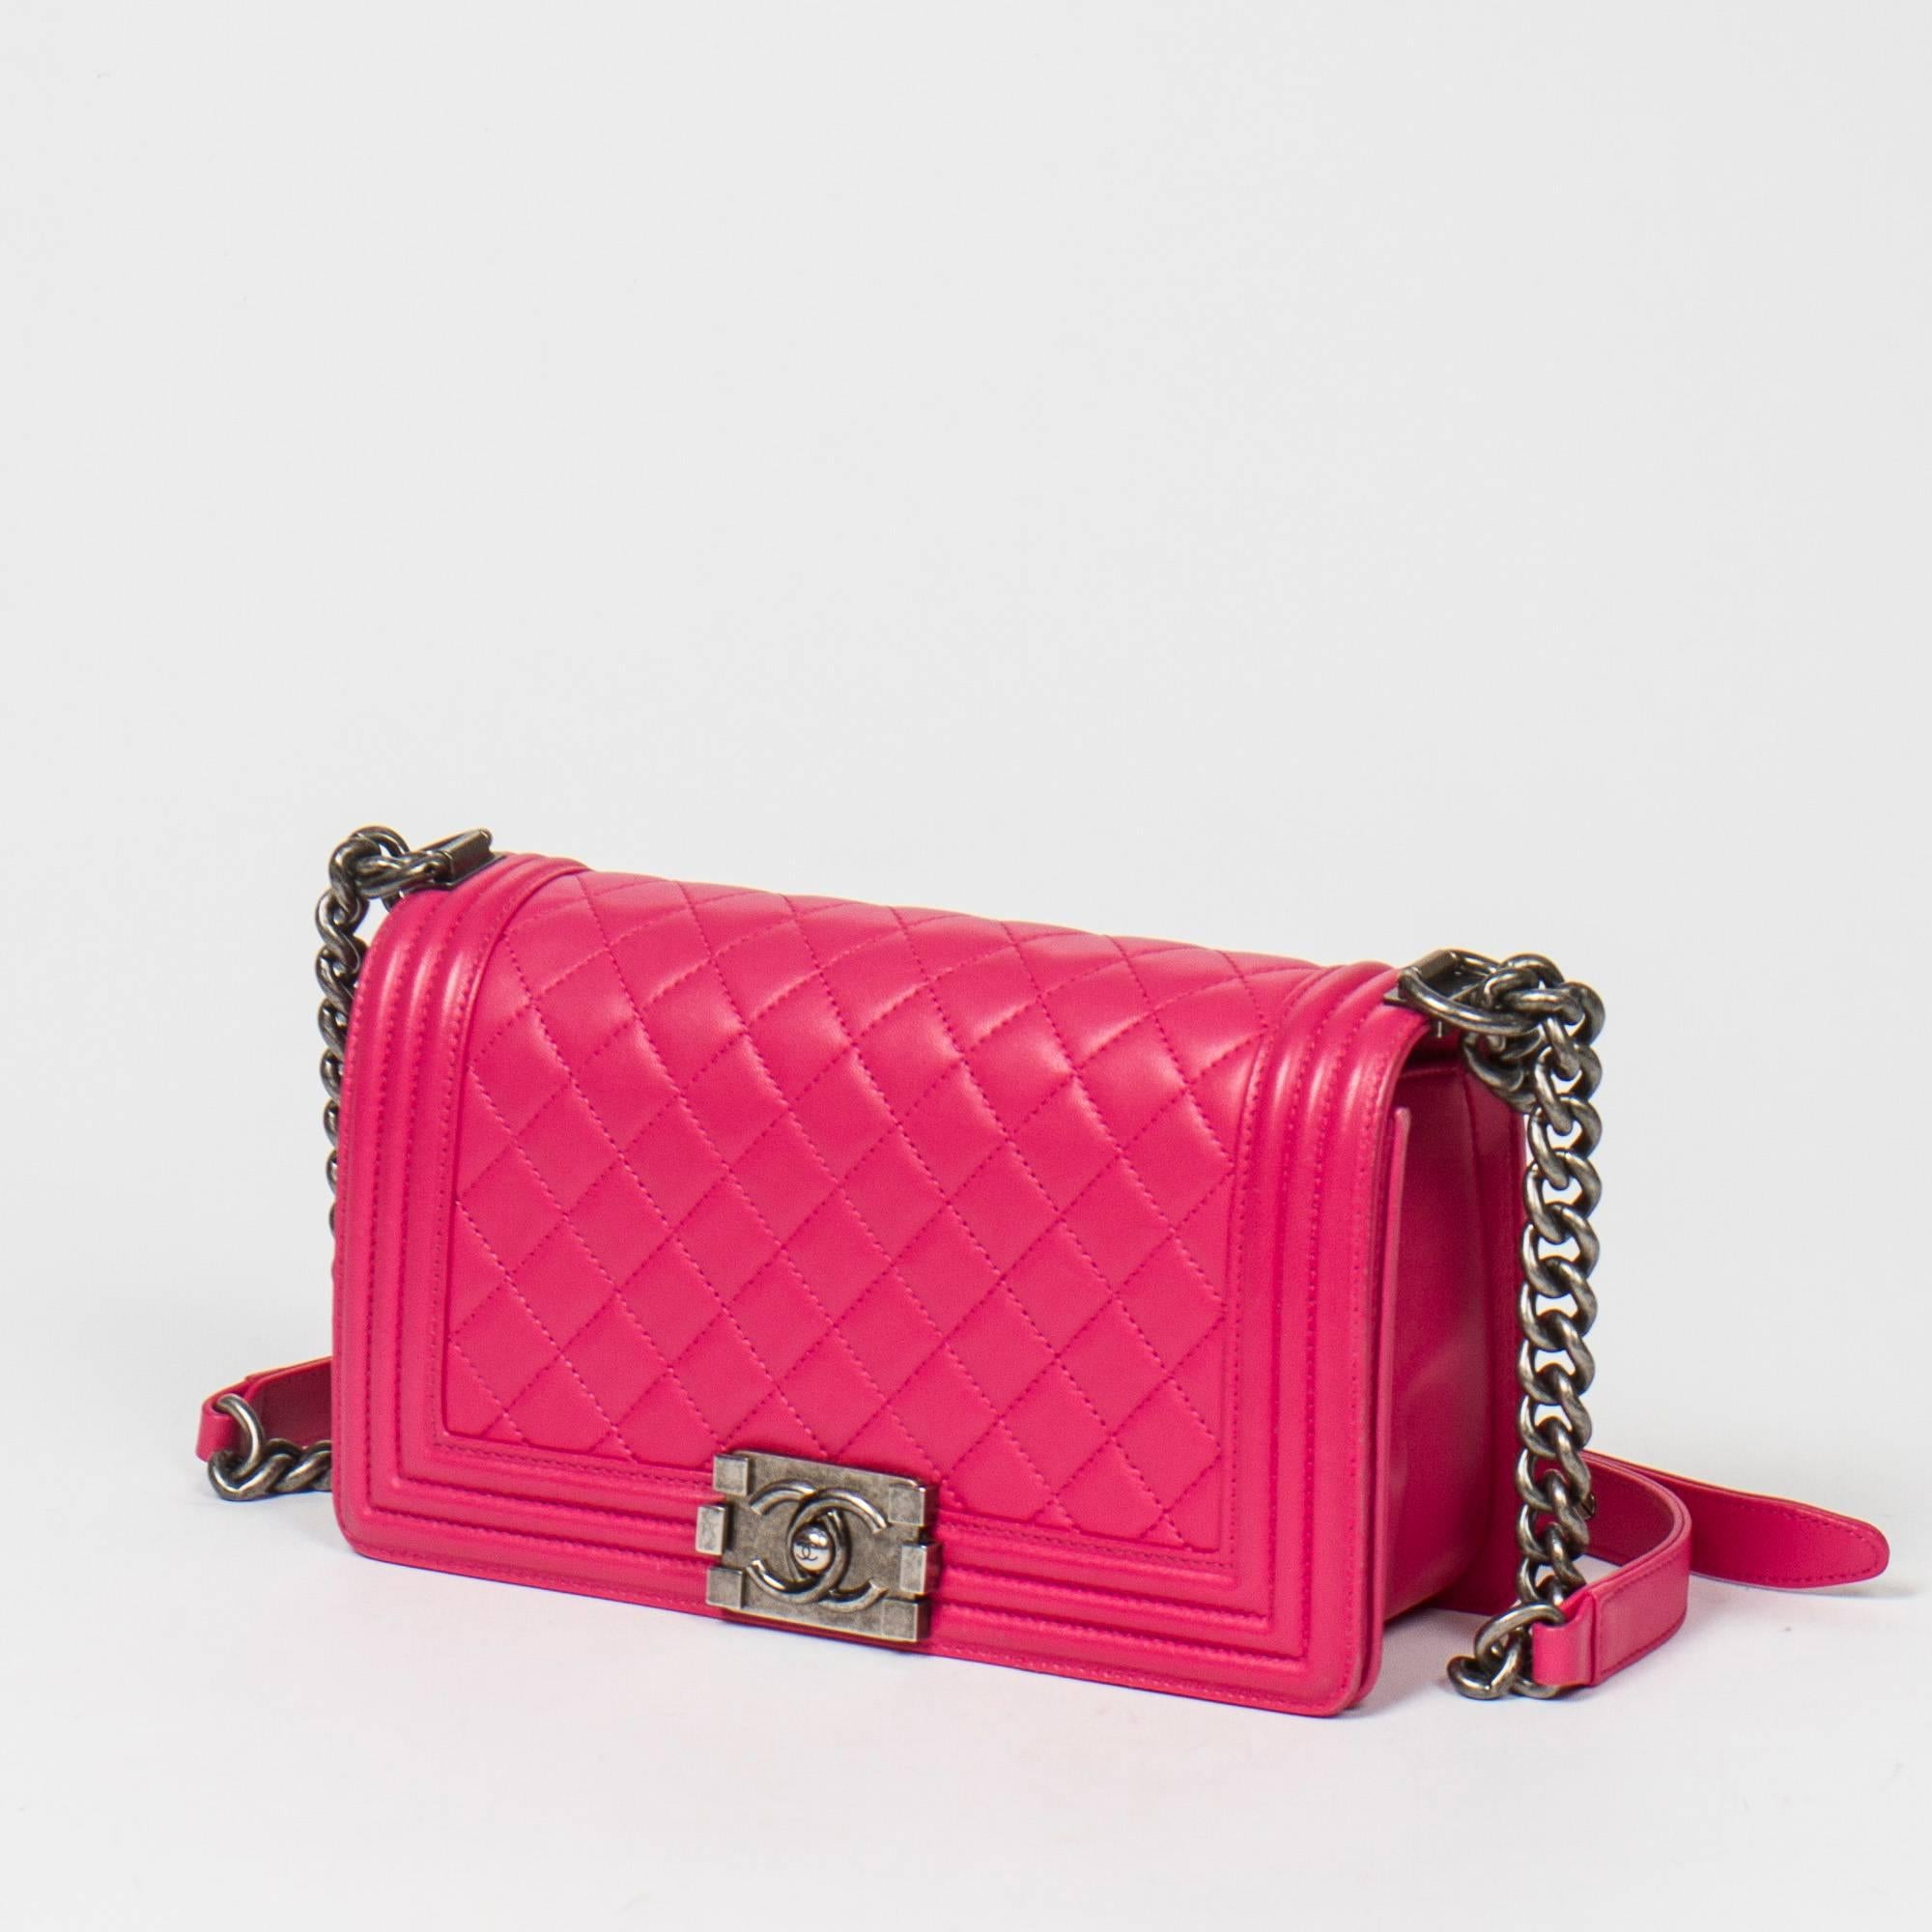 Boy by Chanel in Fuschia quilted leather with Brushed silver chain strap and fuschia leather. Full flap with clasp 